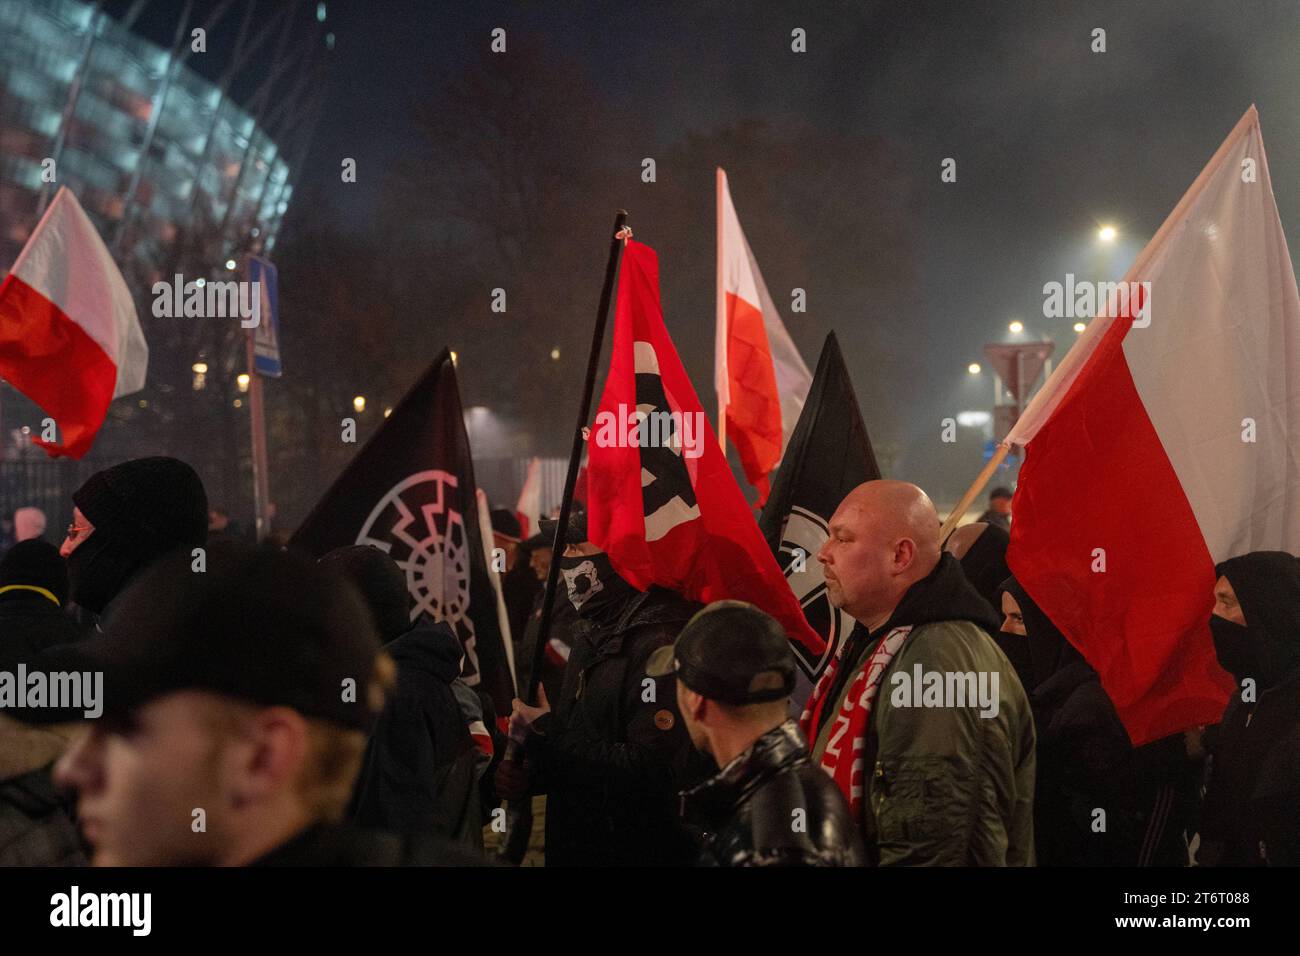 A masked man carries a red flag with a Celtic cross in a white circle during celebrations of the 105th anniversary of Poland regaining independence in Warsaw, November 11, 2023. Thousands of people gathered in the Polish capital, Warsaw, during the previously controversial annual Independence March - true - wing and nationalist Youth All-Poland and ONR groups on the occasion of Independence Day. Warsaw Poland 105th Poland s Independence Day In Warsaw Copyright: xMarekxAntonixIwanczukx MAI01389 Stock Photo